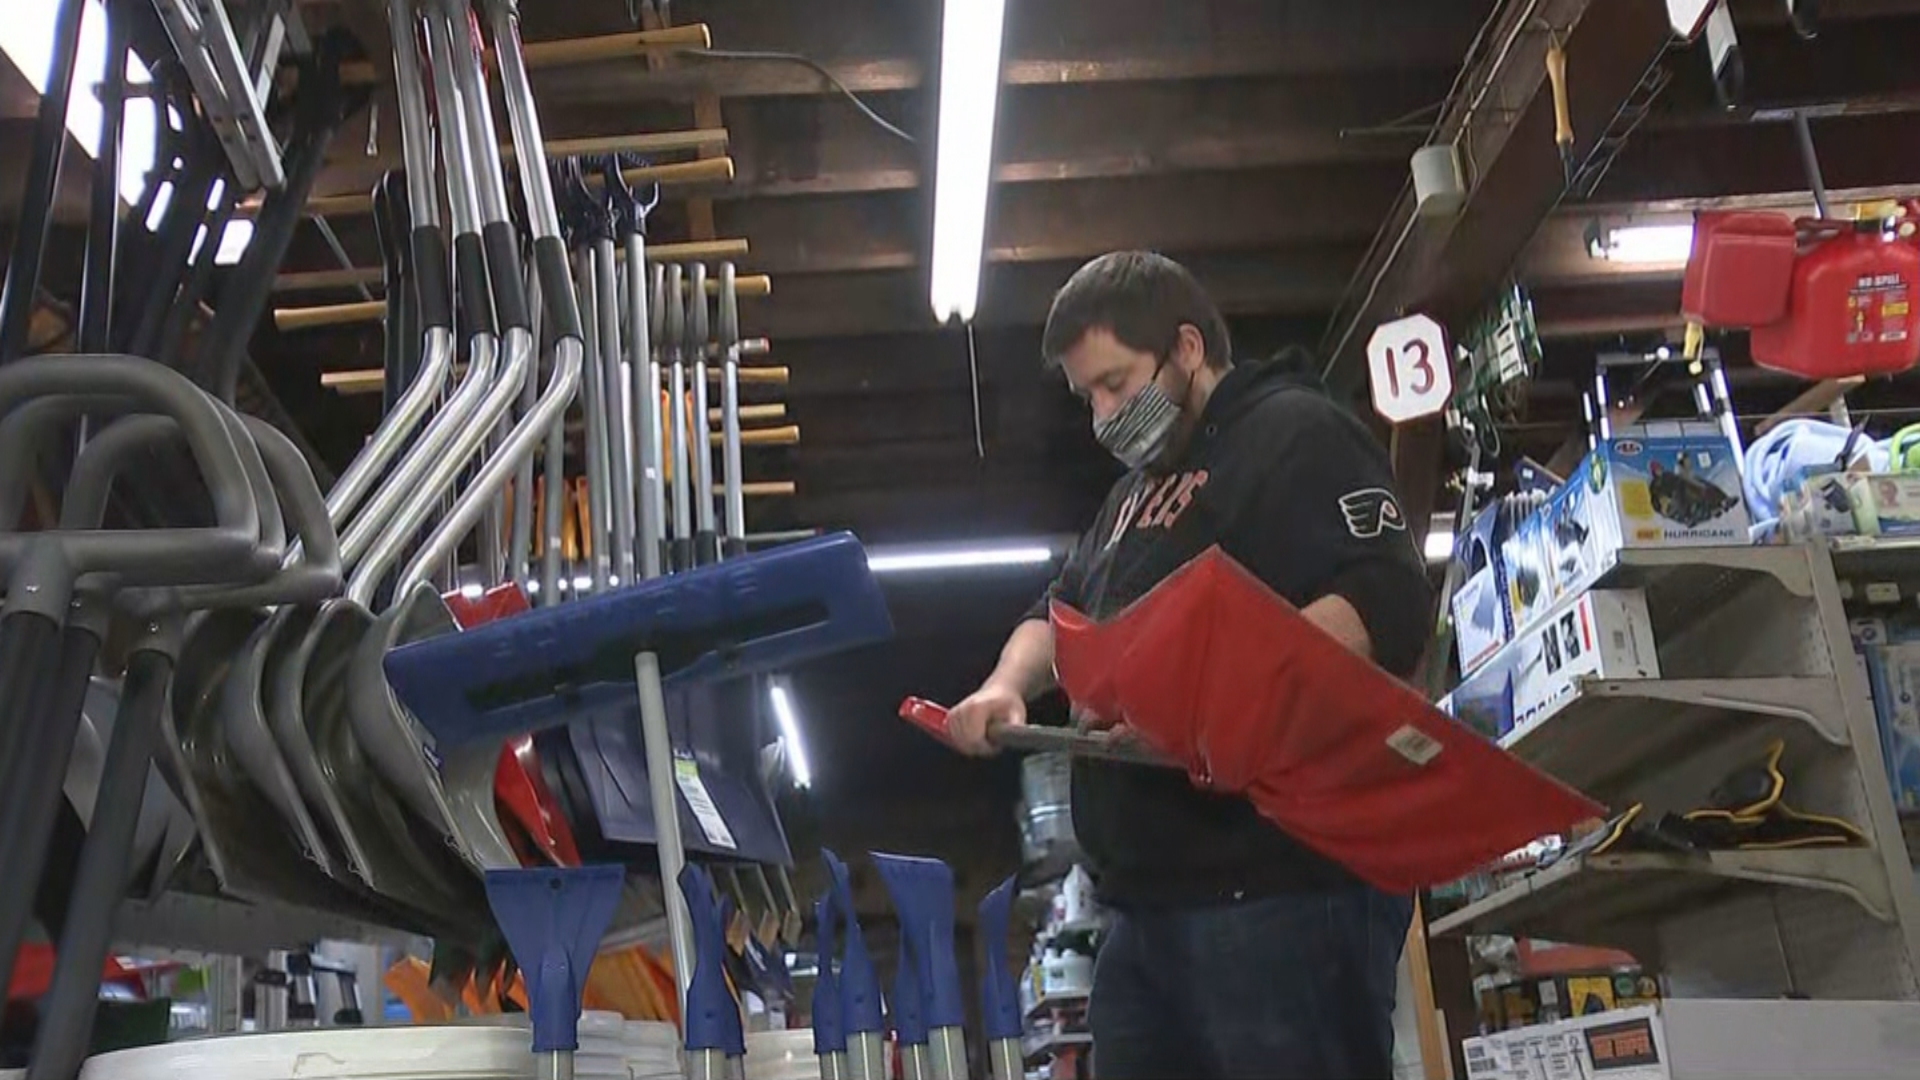 Some Philadelphia Area Hardware Stores Overstocked With Winter Storm Products Due To Supply Chain Shortage: 'It’d Be Nice To Move Some Of This Inventory Out'